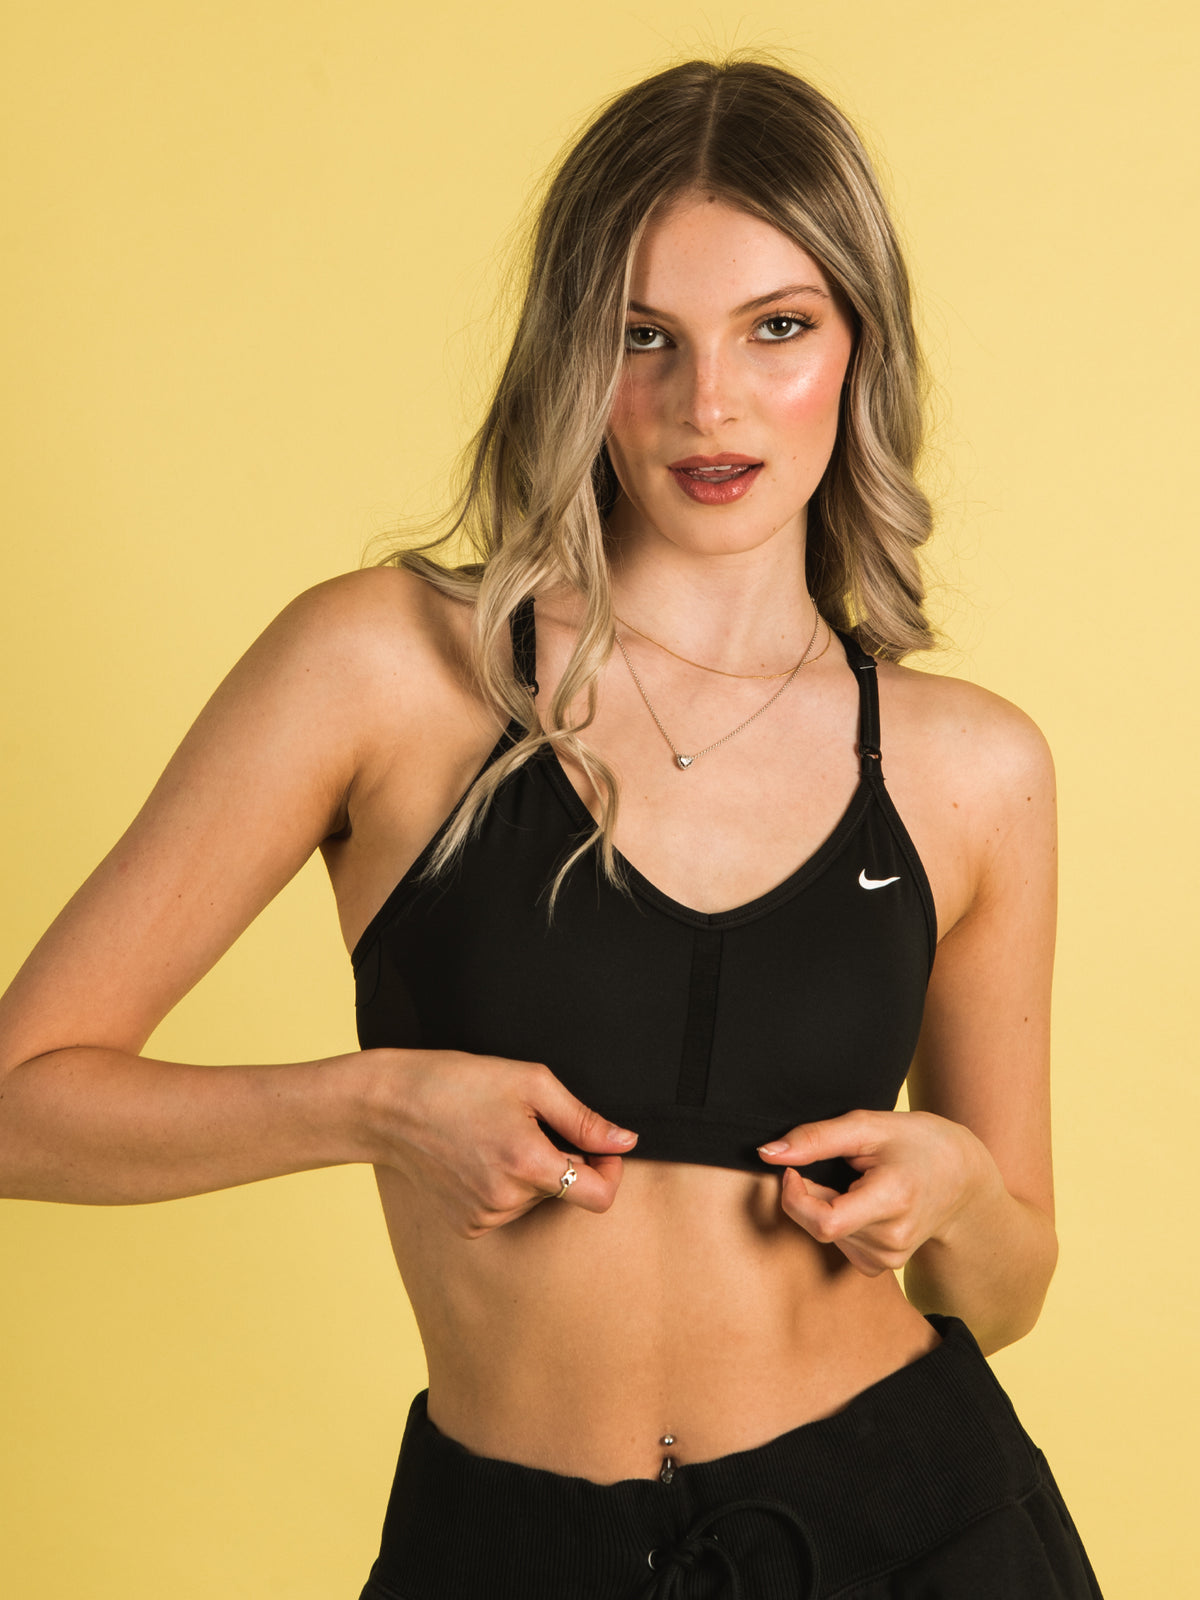 Nike sports bra Small - $27 New With Tags - From Sunny